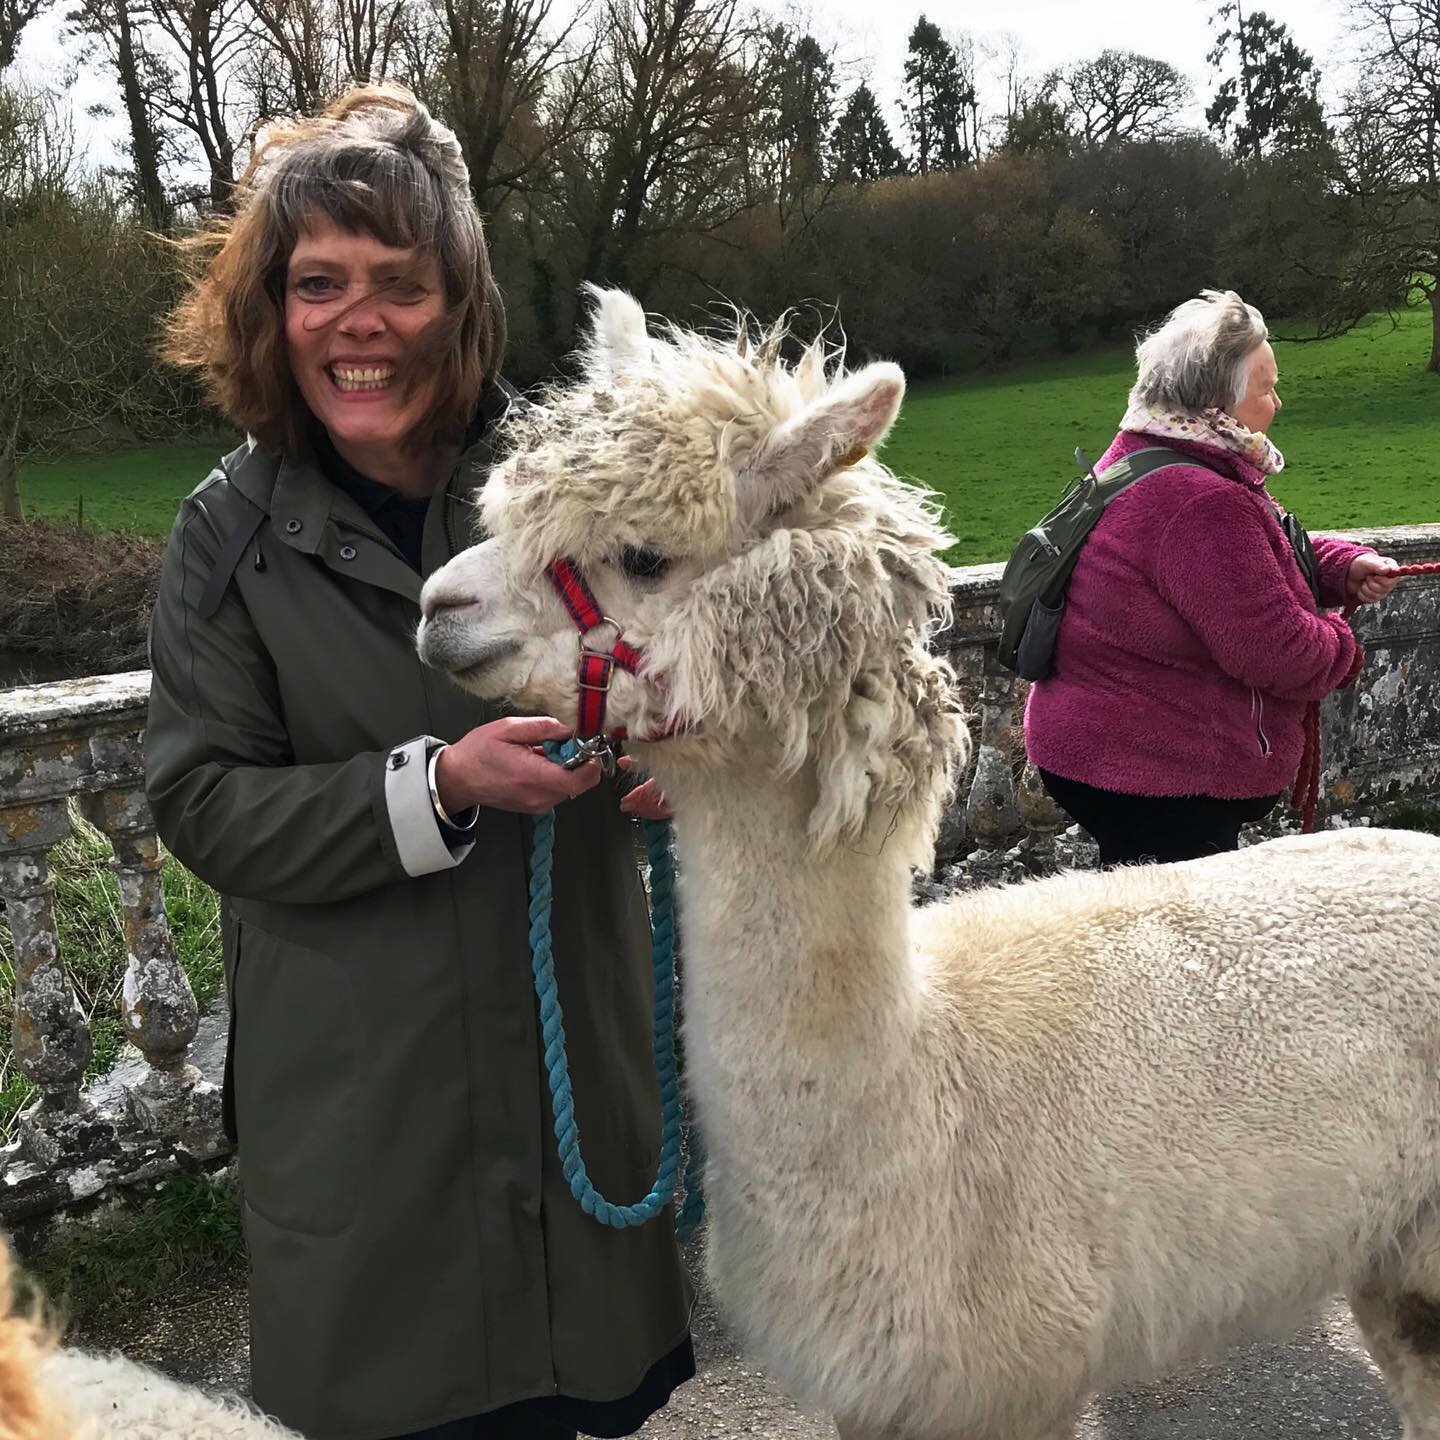 Due to family illness I&rsquo;ve had a hiatus. The first quarter of the year has passed me by but I&rsquo;m slowly clambering back onto the Instagram pony (or in this case #alpacas ). It was my Birthday at the weekend and I had a lovely couple of day